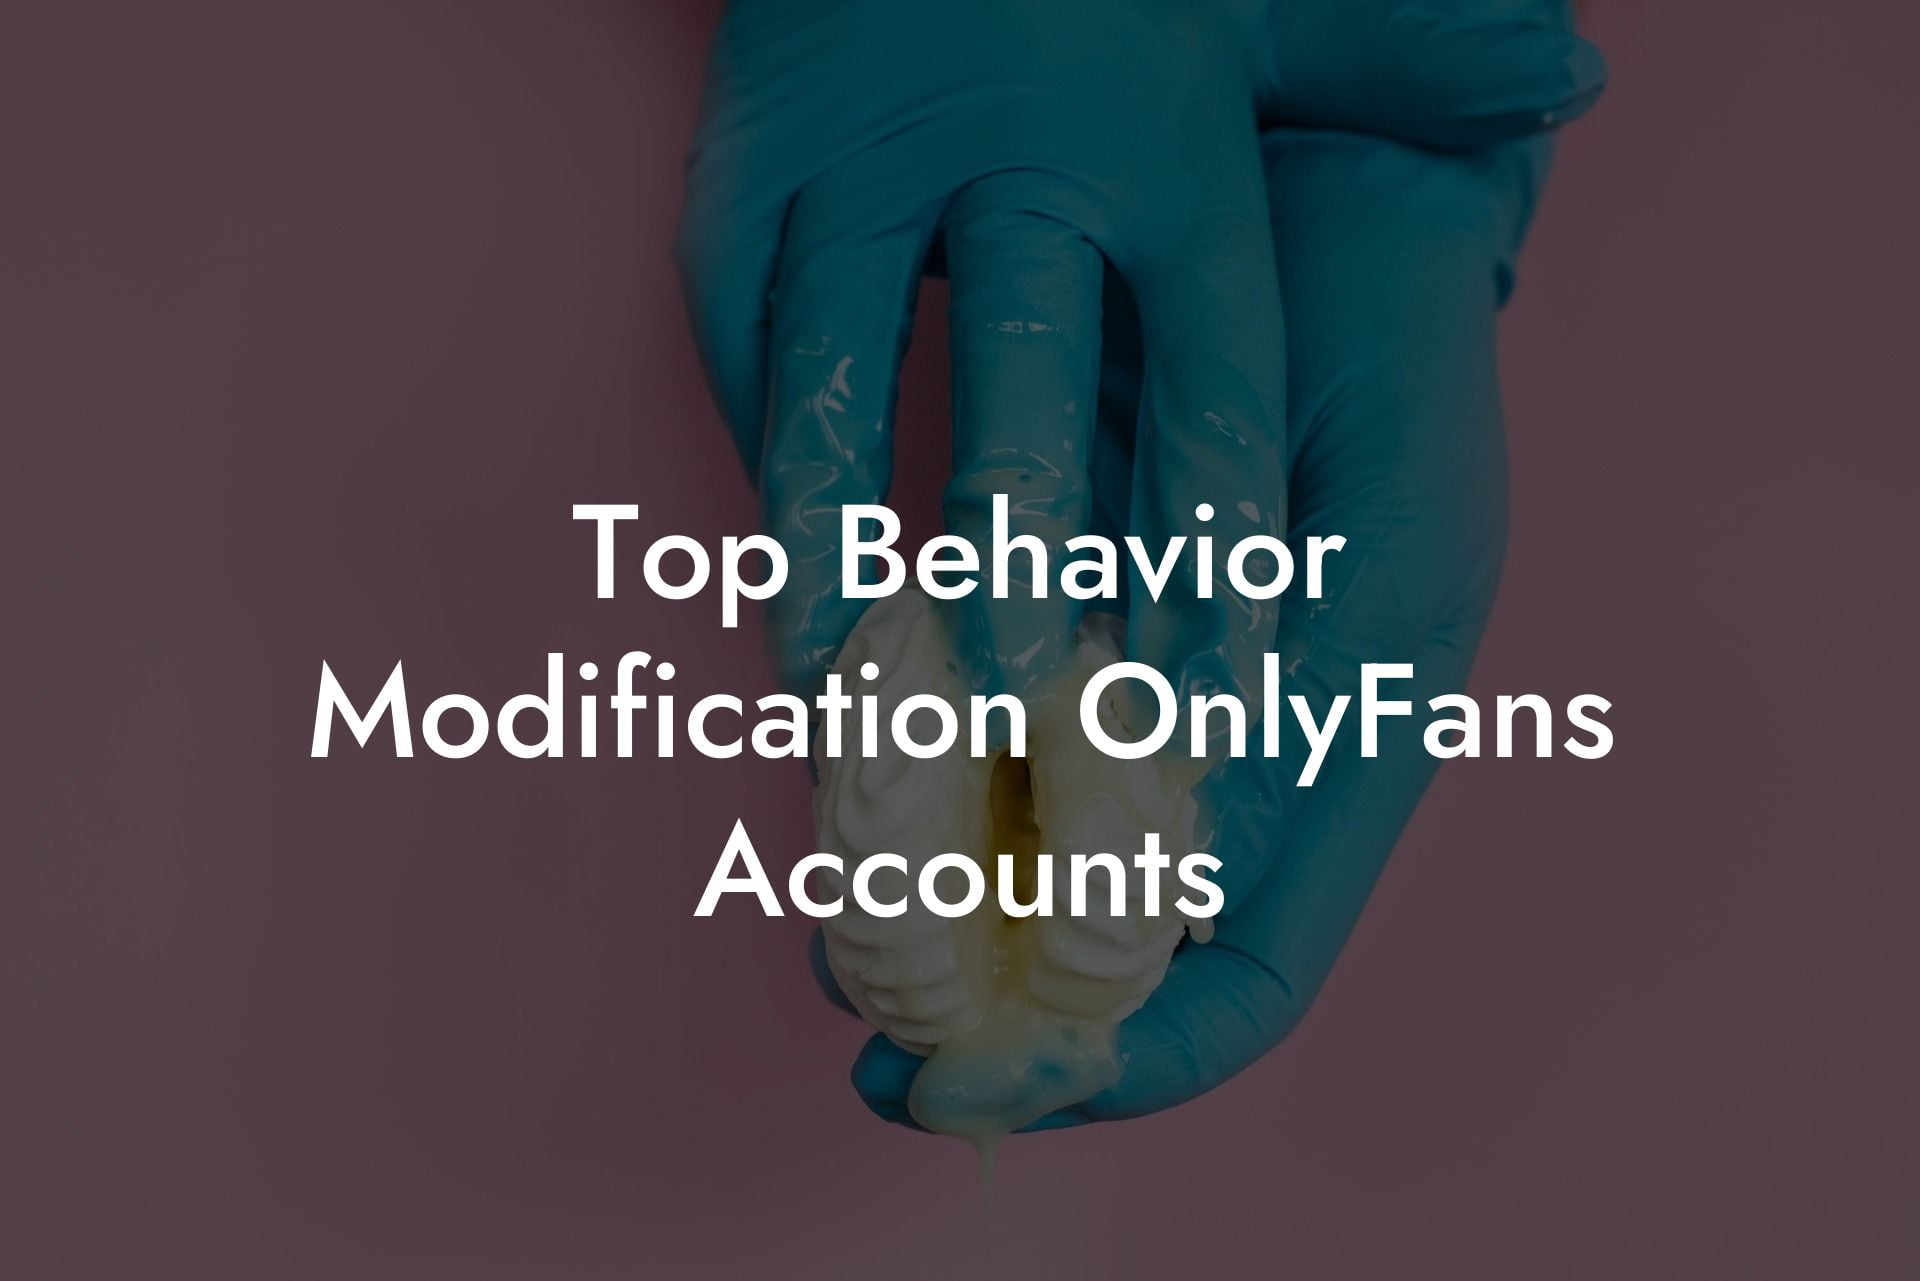 Top Behavior Modification OnlyFans Accounts